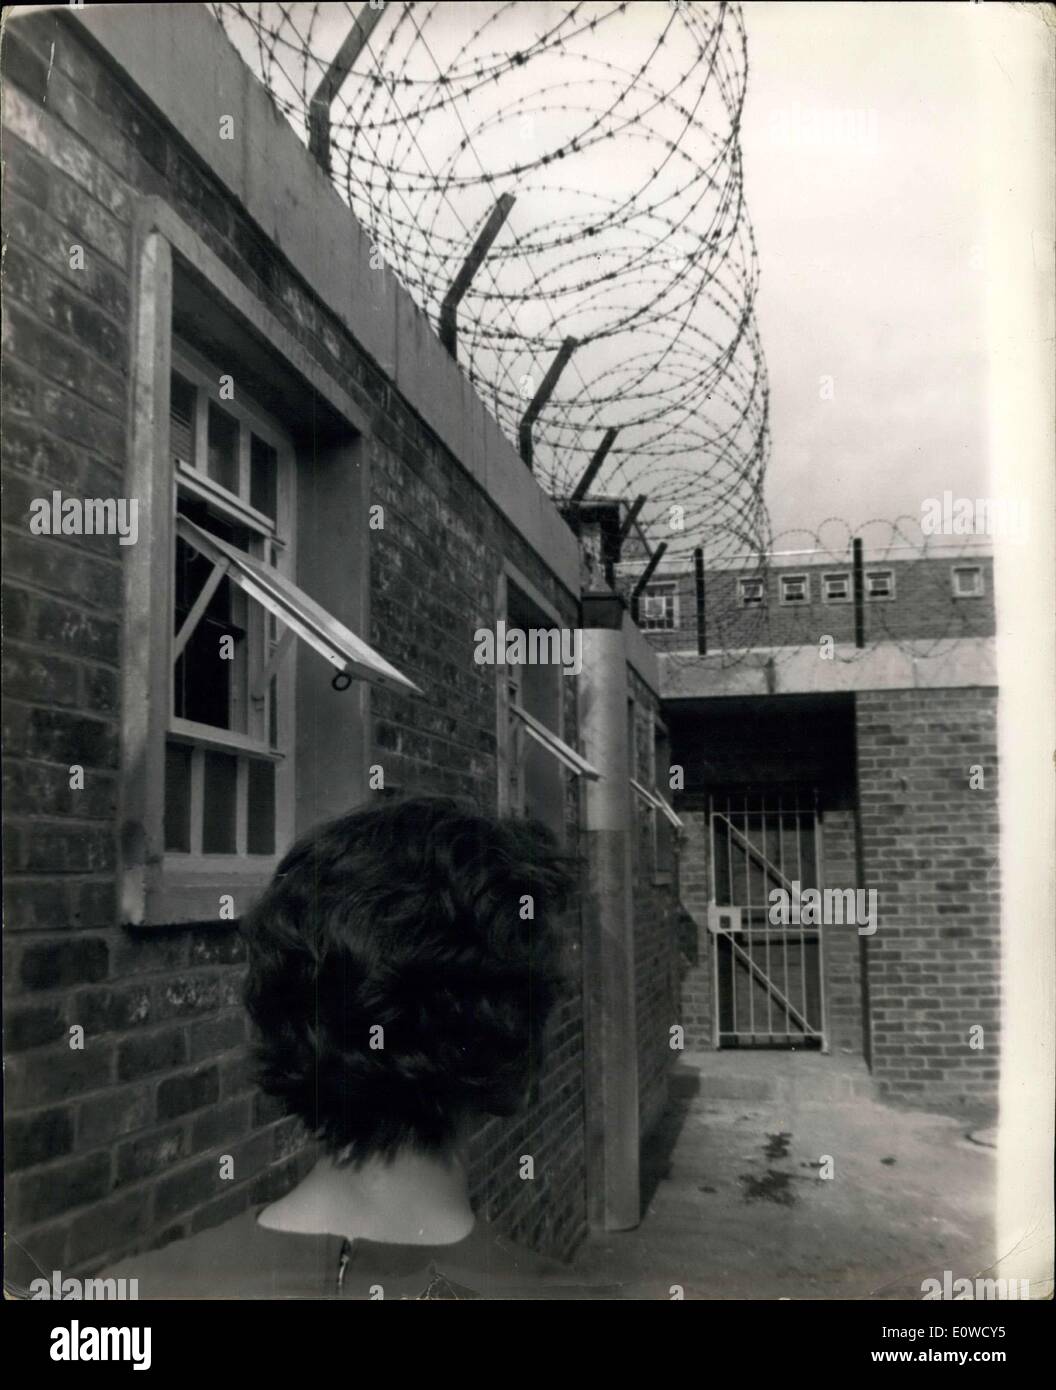 May 16, 1962 - Borstal for persistent girl offenders.: The first inmates will arrive at a new Borstal for persistent girl offenders 21 at Bullwoo', near Hockley, Essex, girls will face hard work and strict in what the Home Office calls a coure ''Boratal. It will house 96 offenders - from six months to two years. Photo shows A girl seen in the Punishment Block Exercise yard, whose walls are surmounted with barbed wire. Stock Photo